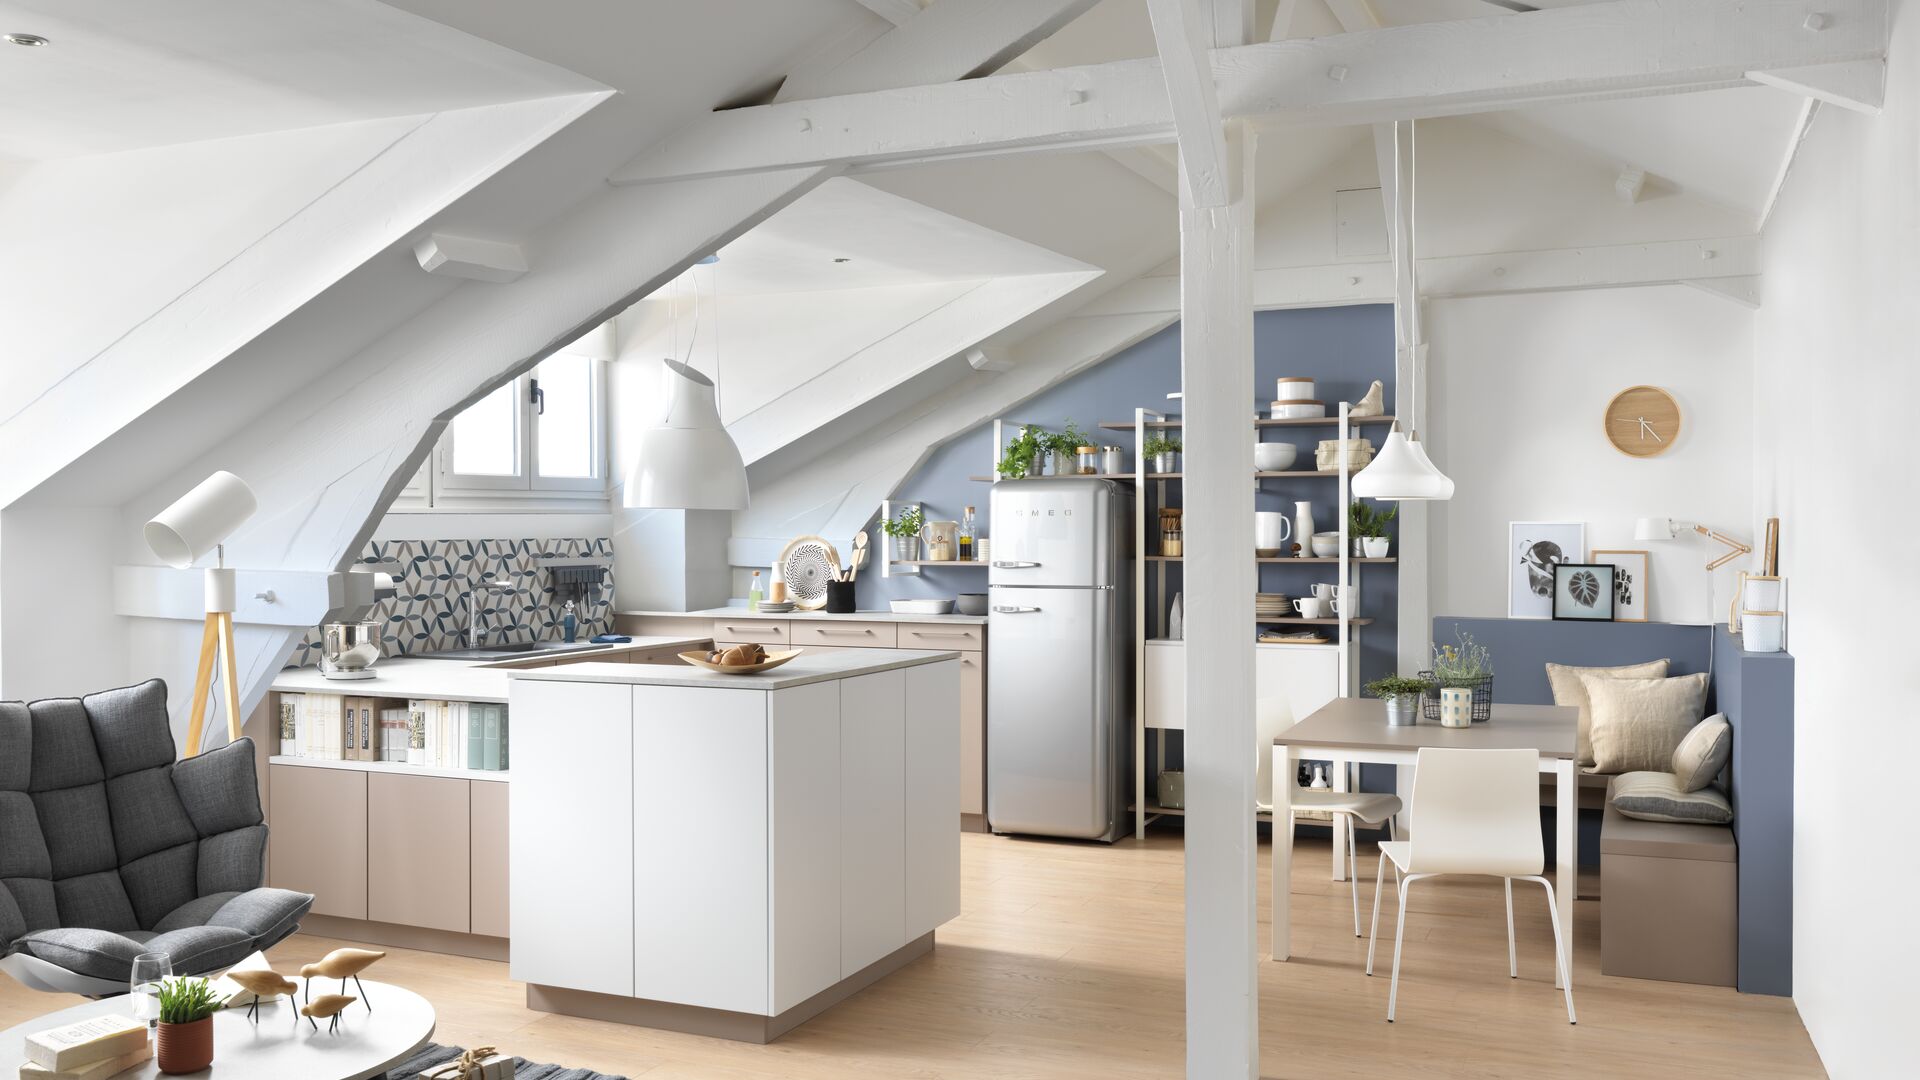 Even under the eaves, a kitchen can feel spacious and well organised.